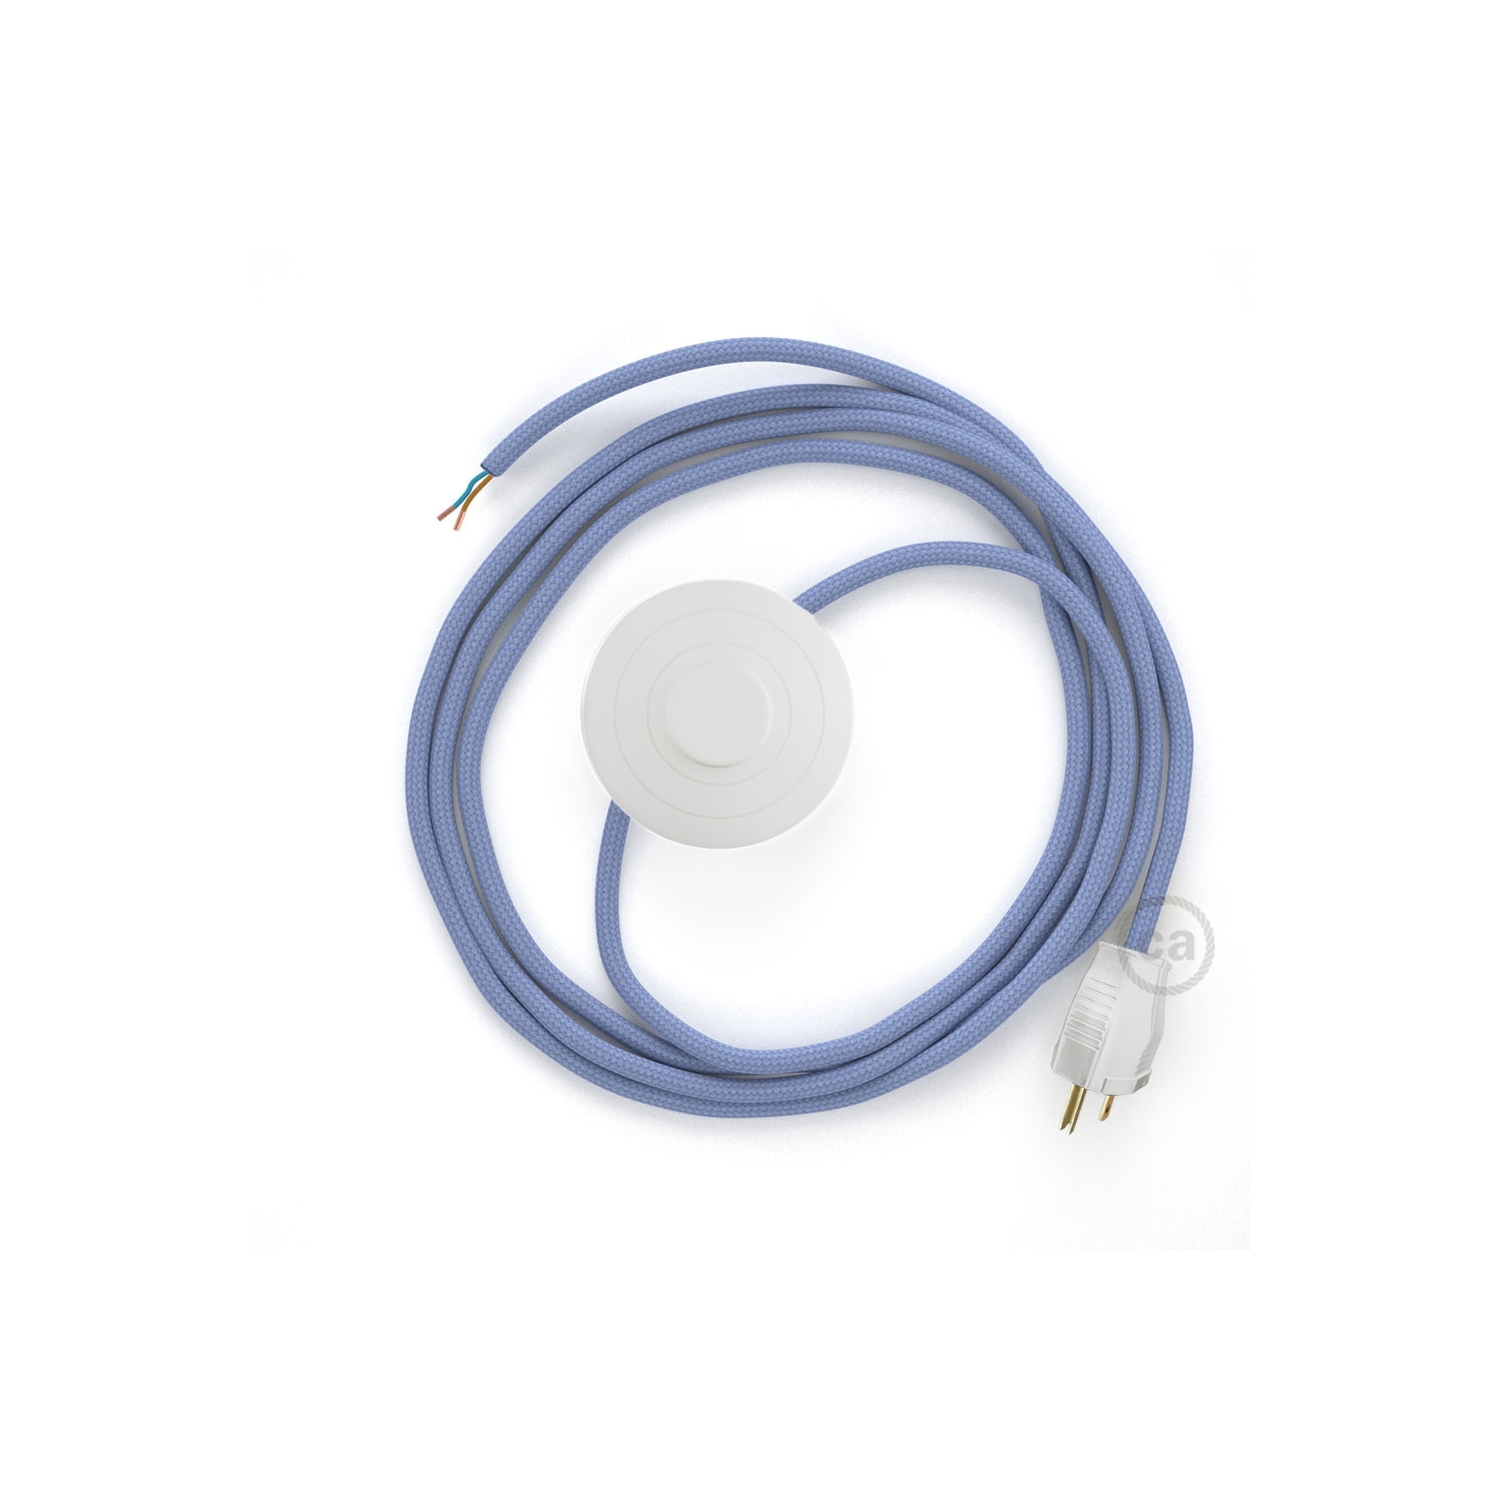 Power Cord with foot switch, RM07 Lilac Rayon - Choose color of switch/plug